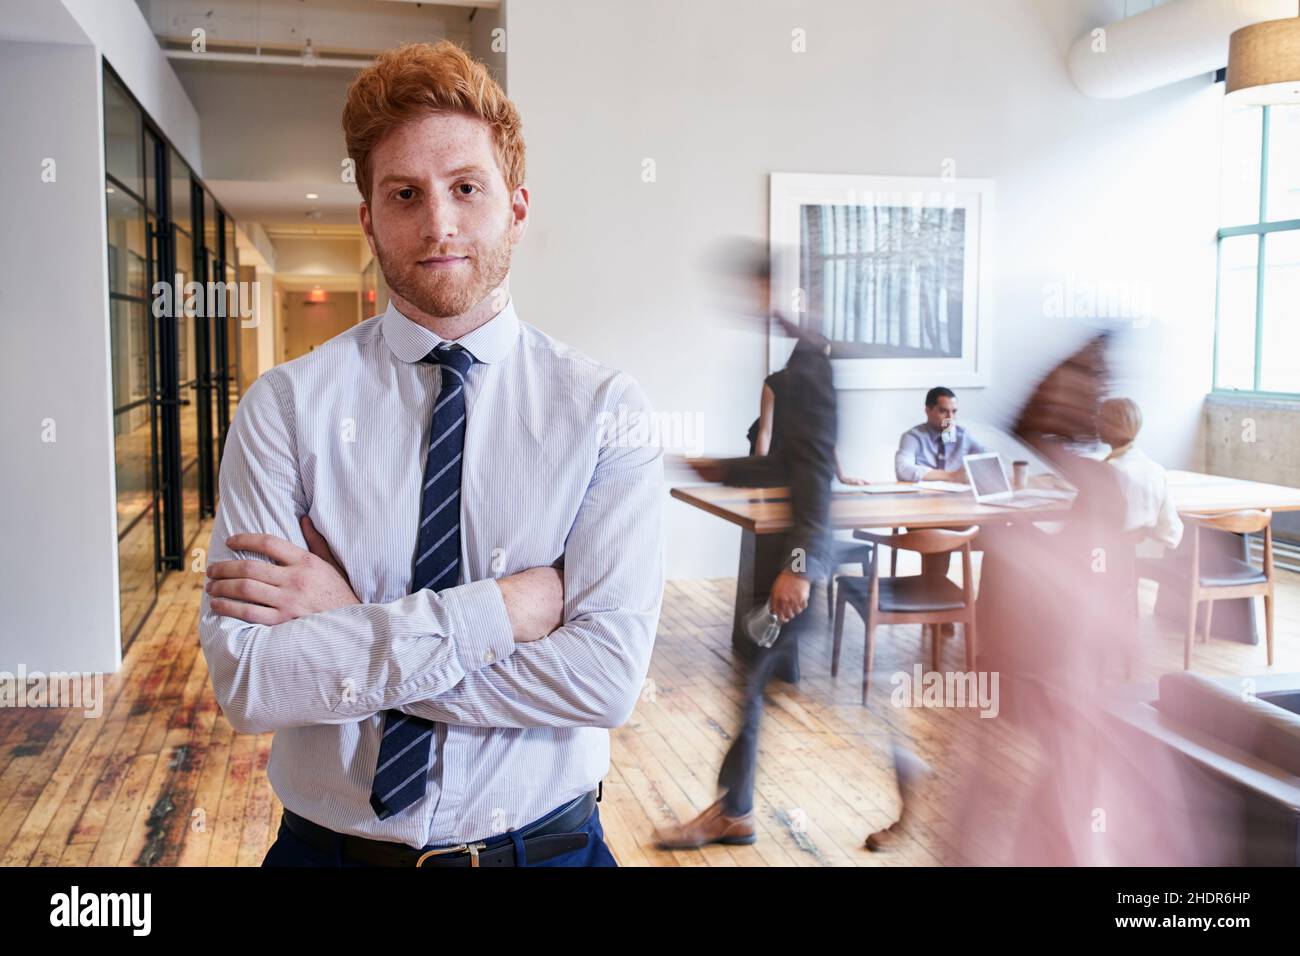 businessman, serious, consistently, boss, businessmen, executive, executives, leader, leaders, manager, consistentlies Stock Photo